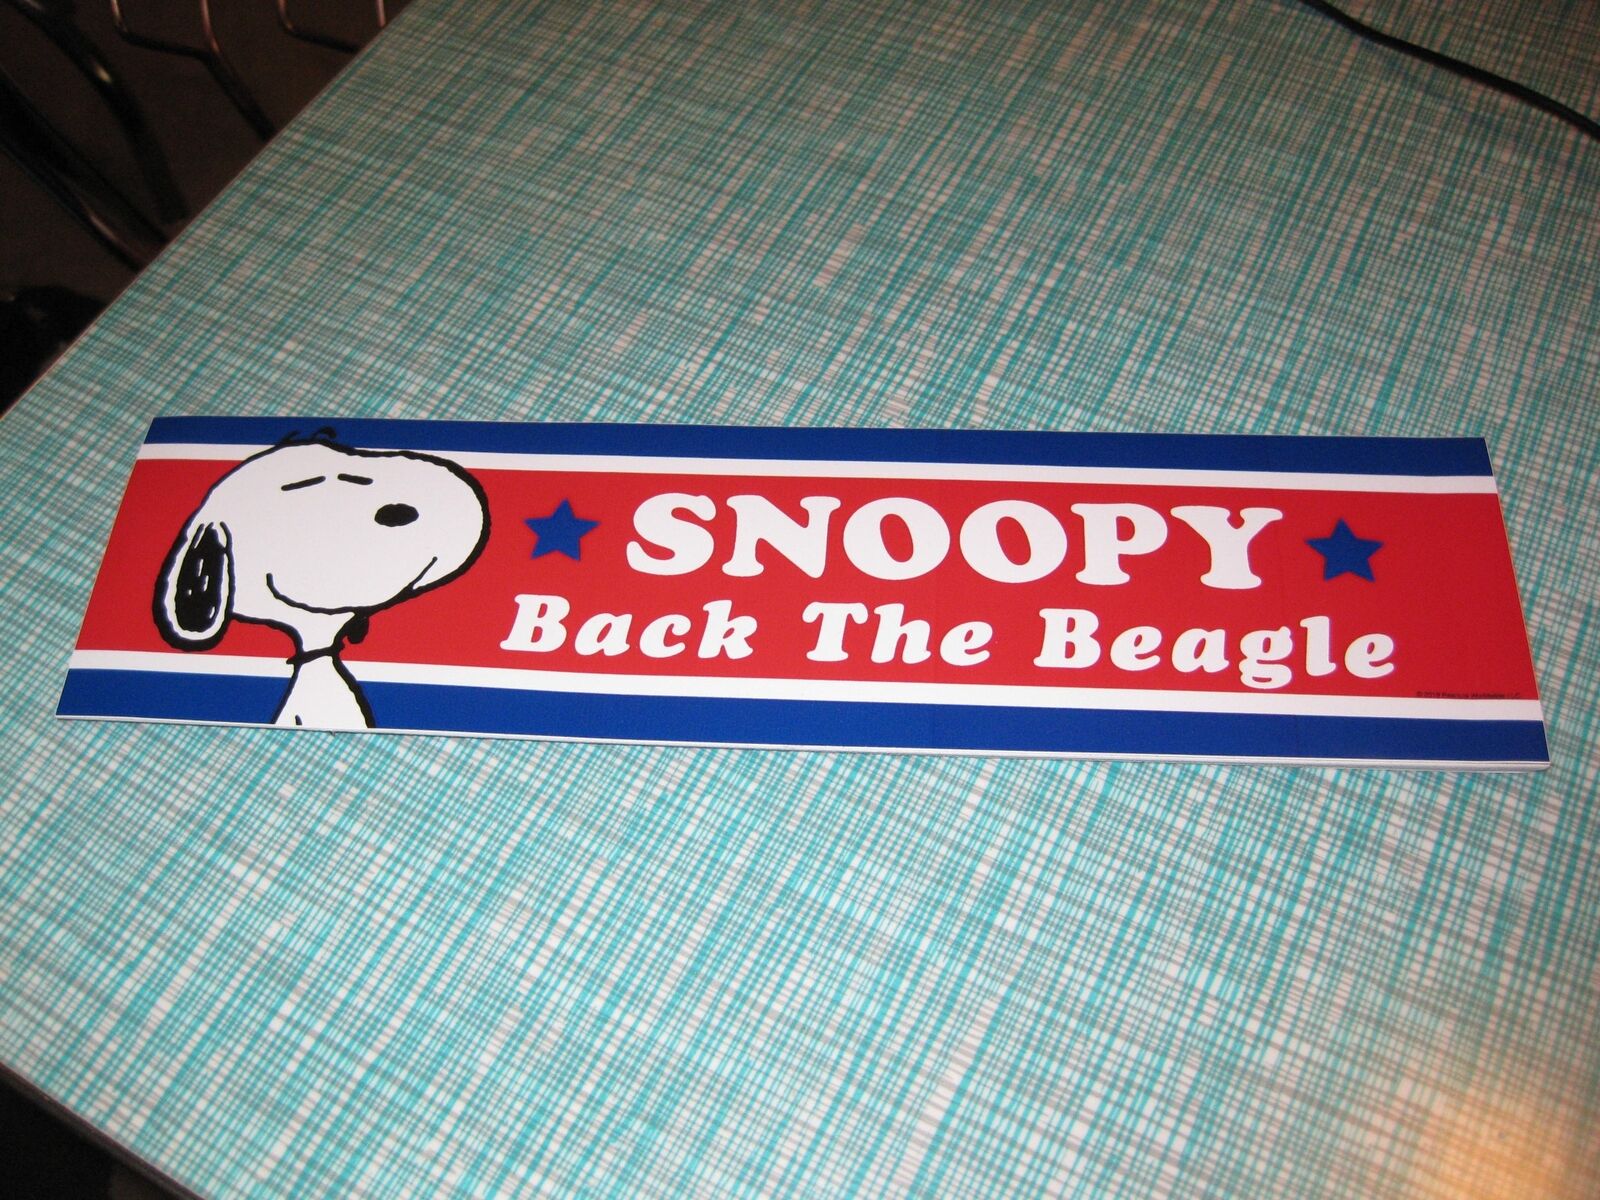 Snoopy Back the Beagle Bumper Sticker NEW RARE 2016  Snoopy For President